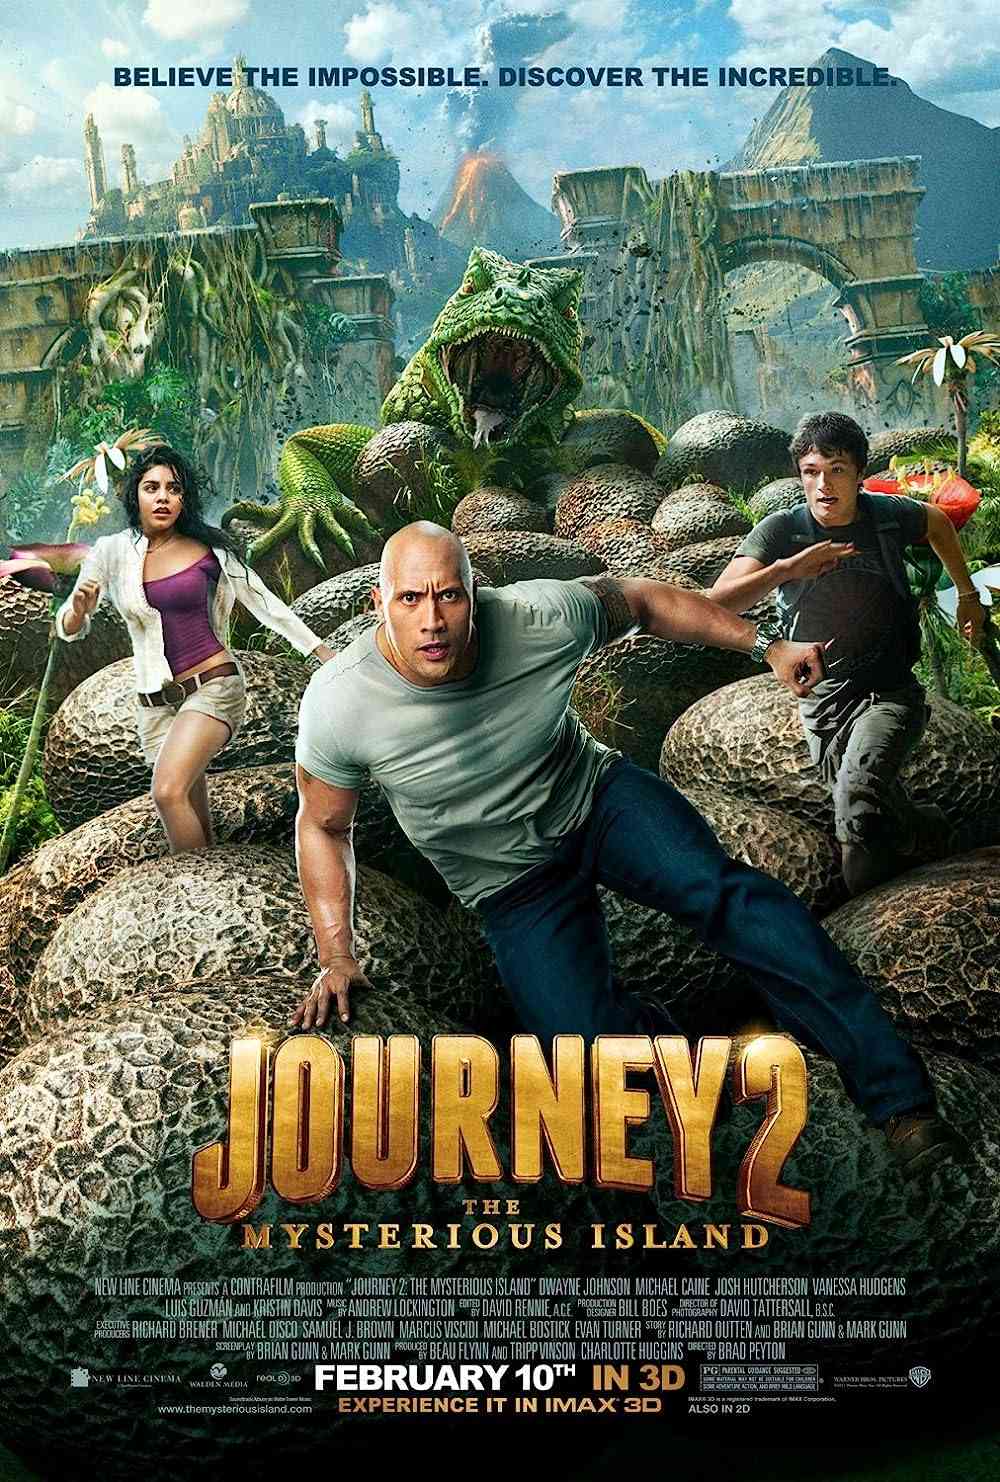 FULL MOVIE: Journey 2: The Mysterious Island (2012)